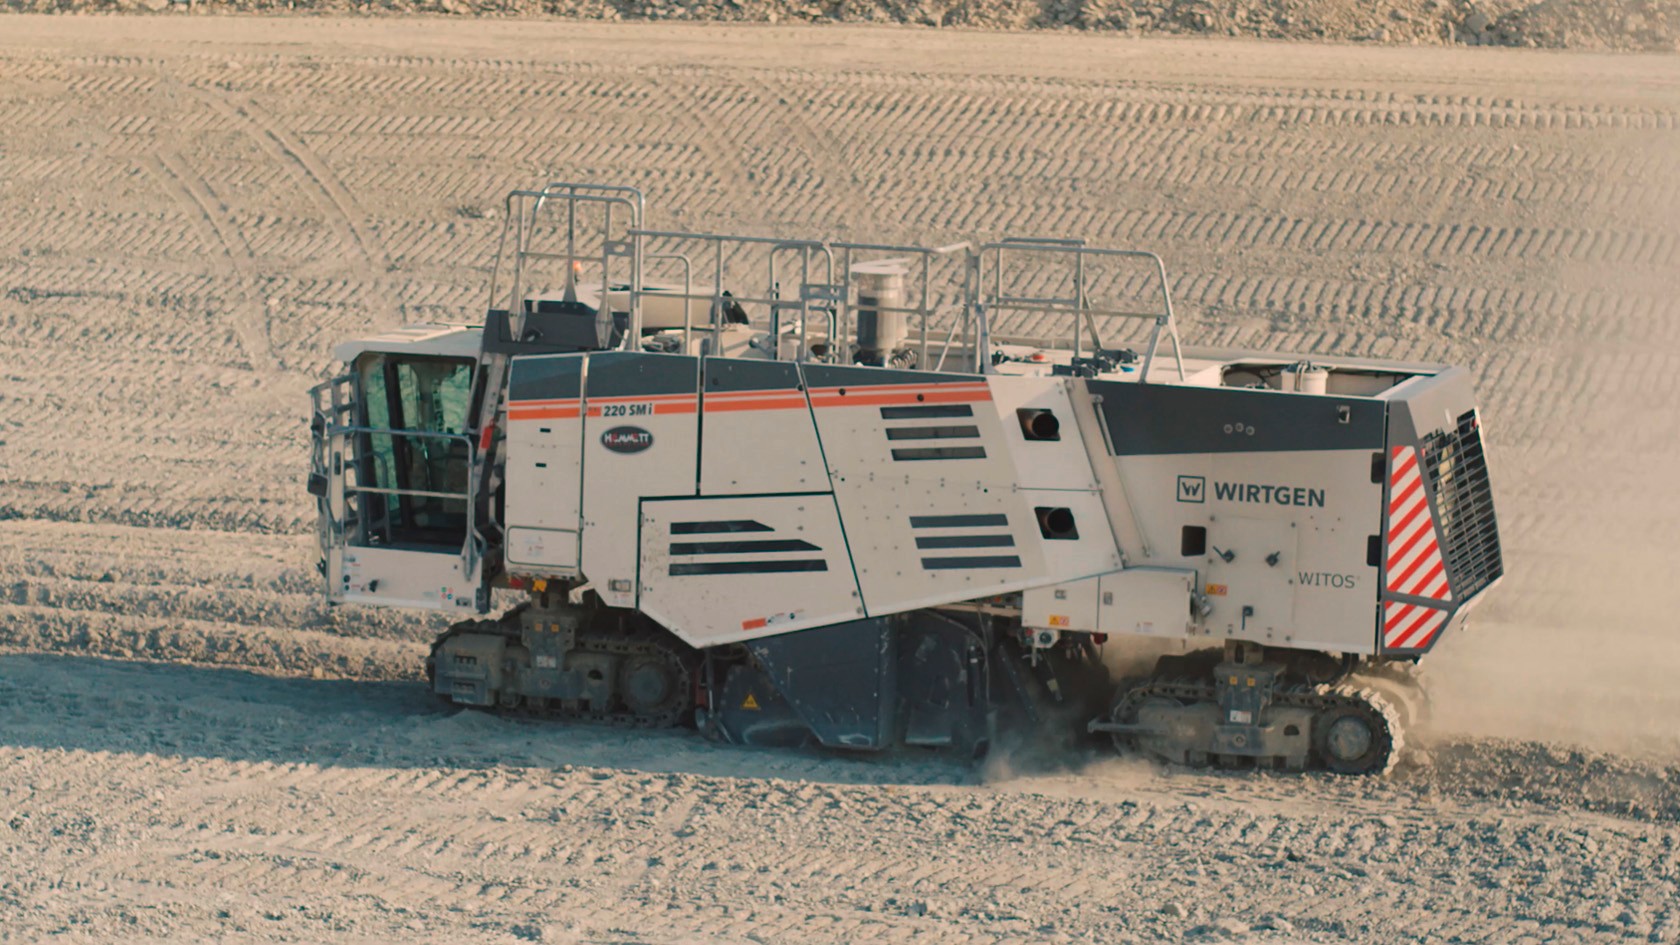  The 220 SMi Surface Miner during routing operations on the project site